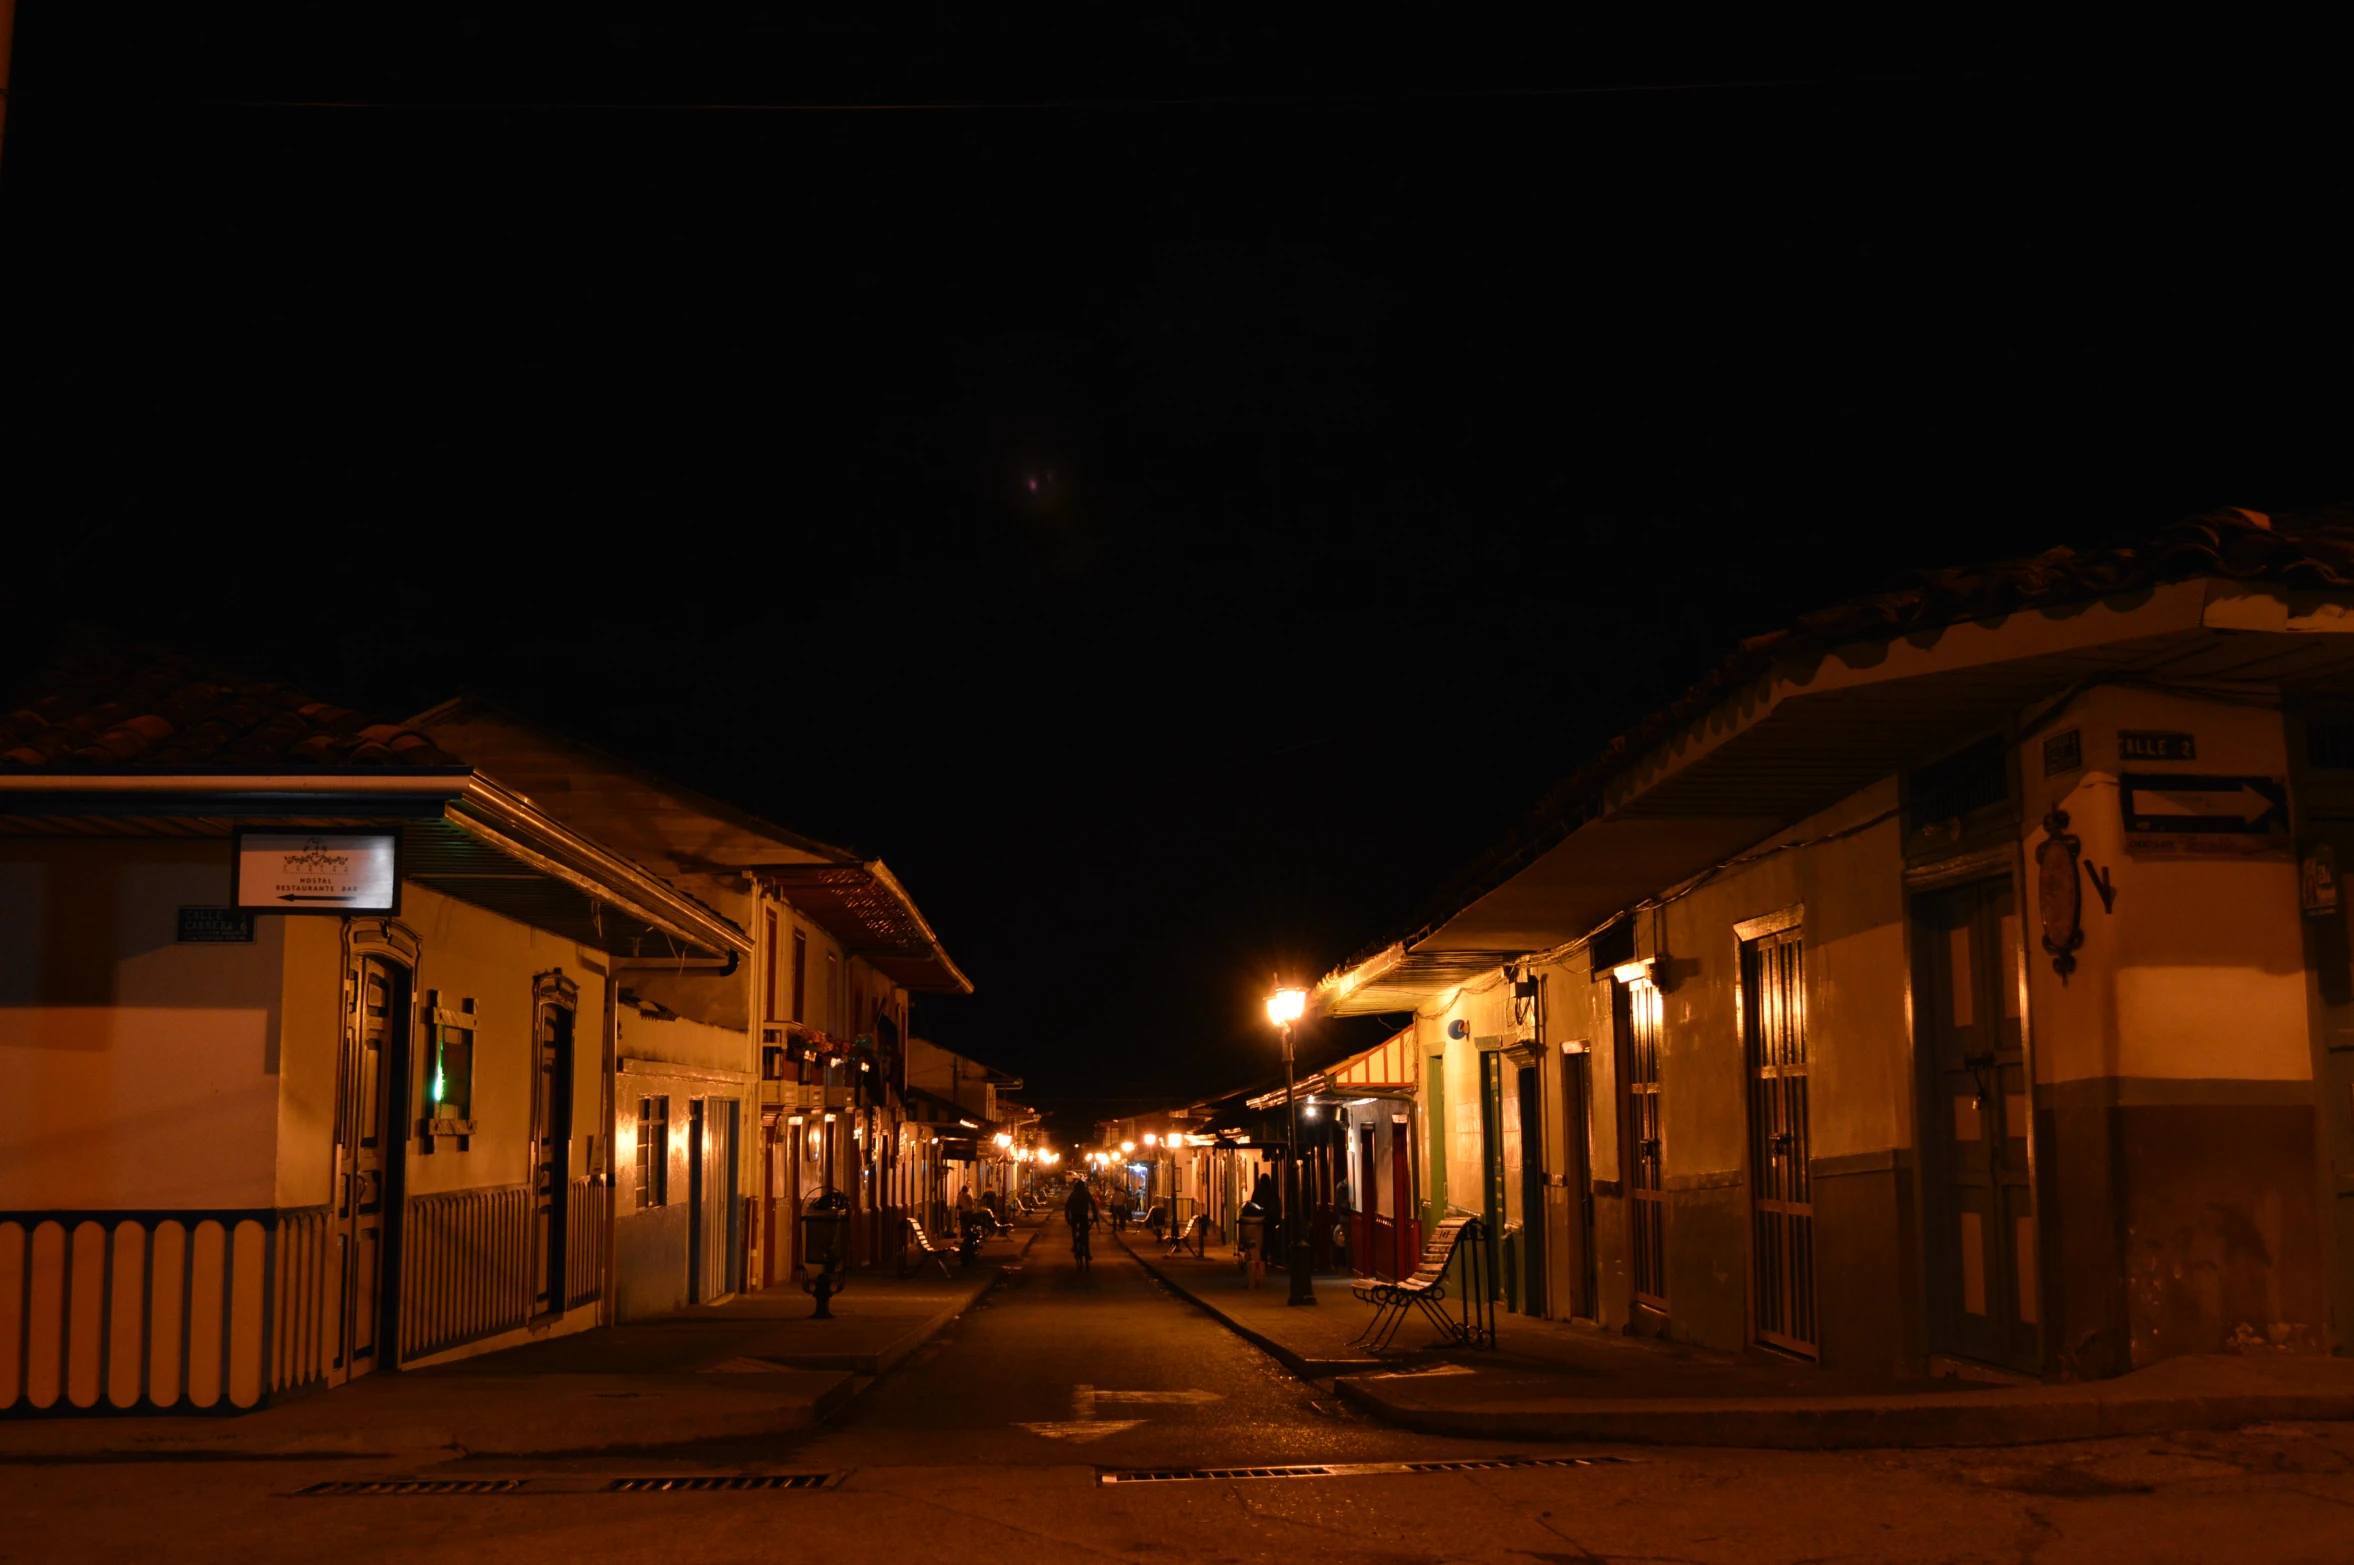 several old buildings on the side of an empty street at night